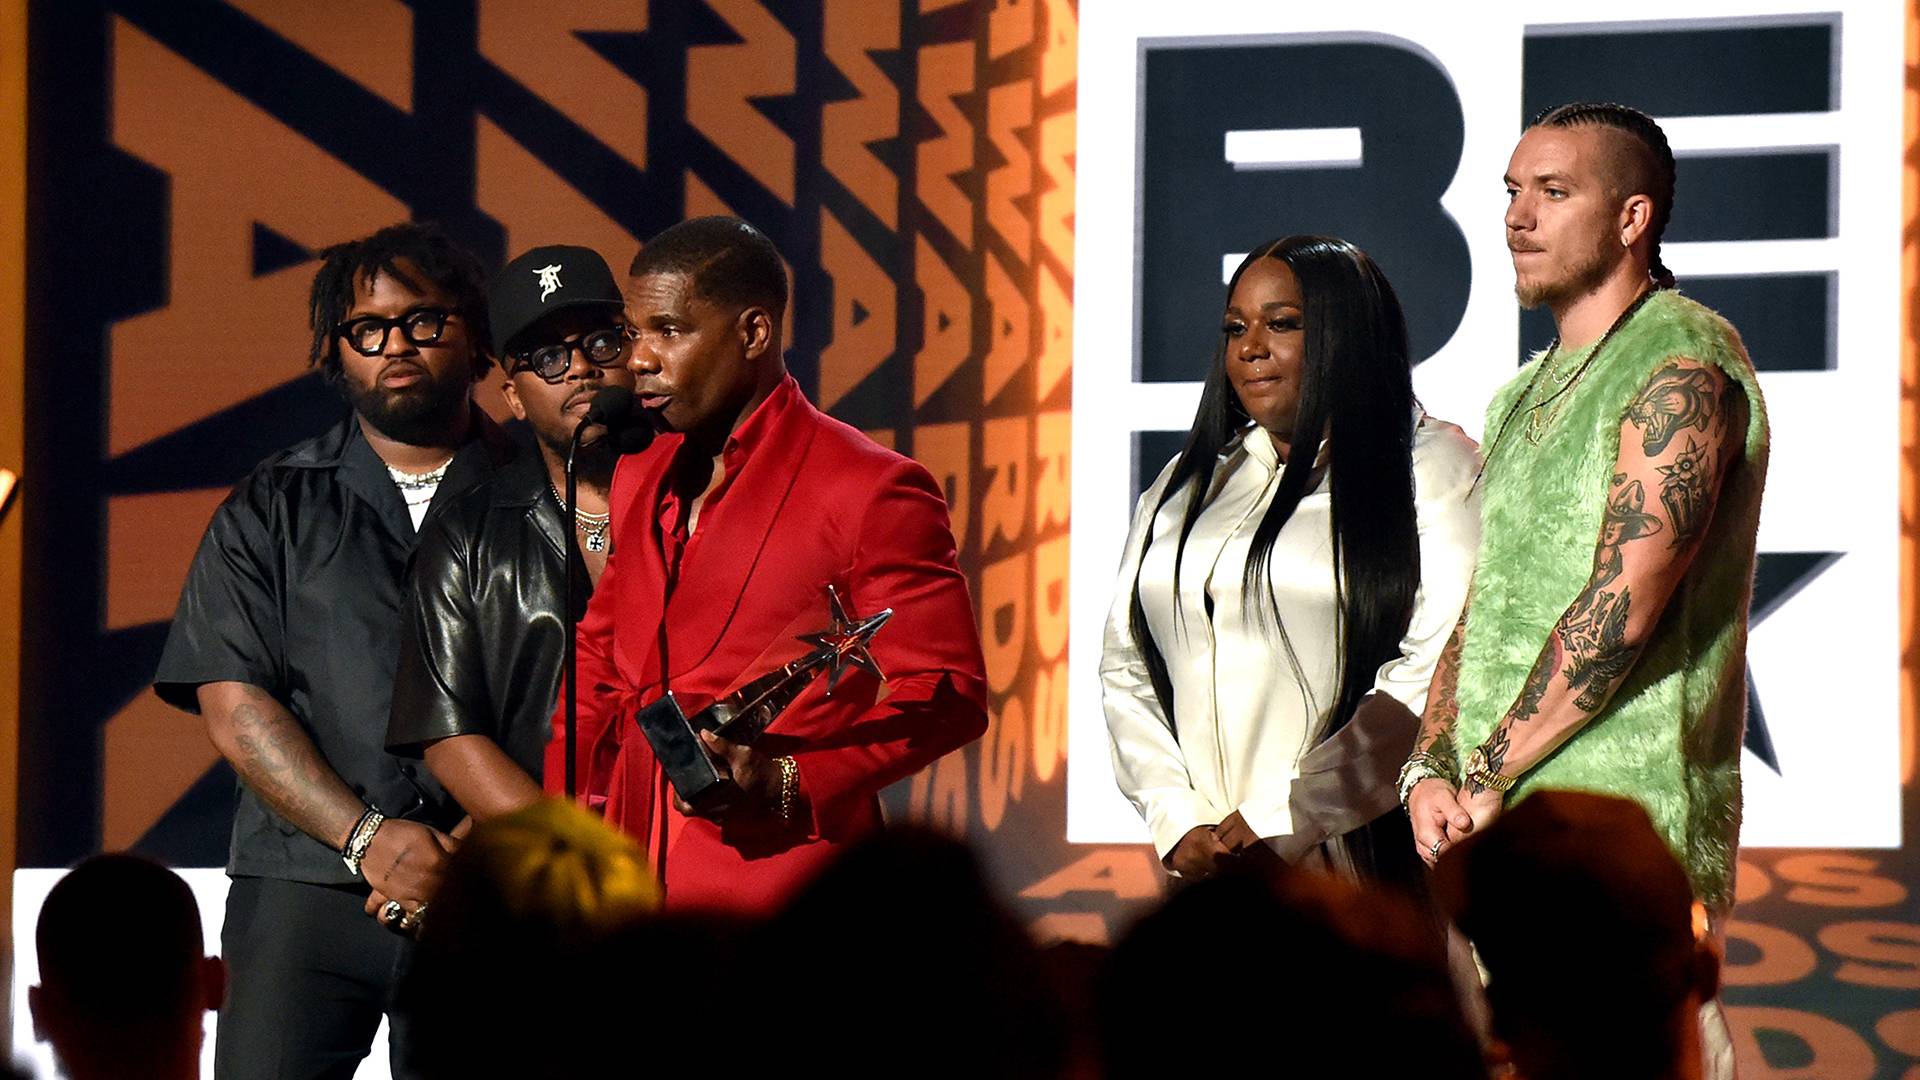 Best Gospel/Inspirational Award Winners Kirk Franklin and Maverick City Music (Photo by Aaron J. Thornton/Getty Images for BET)